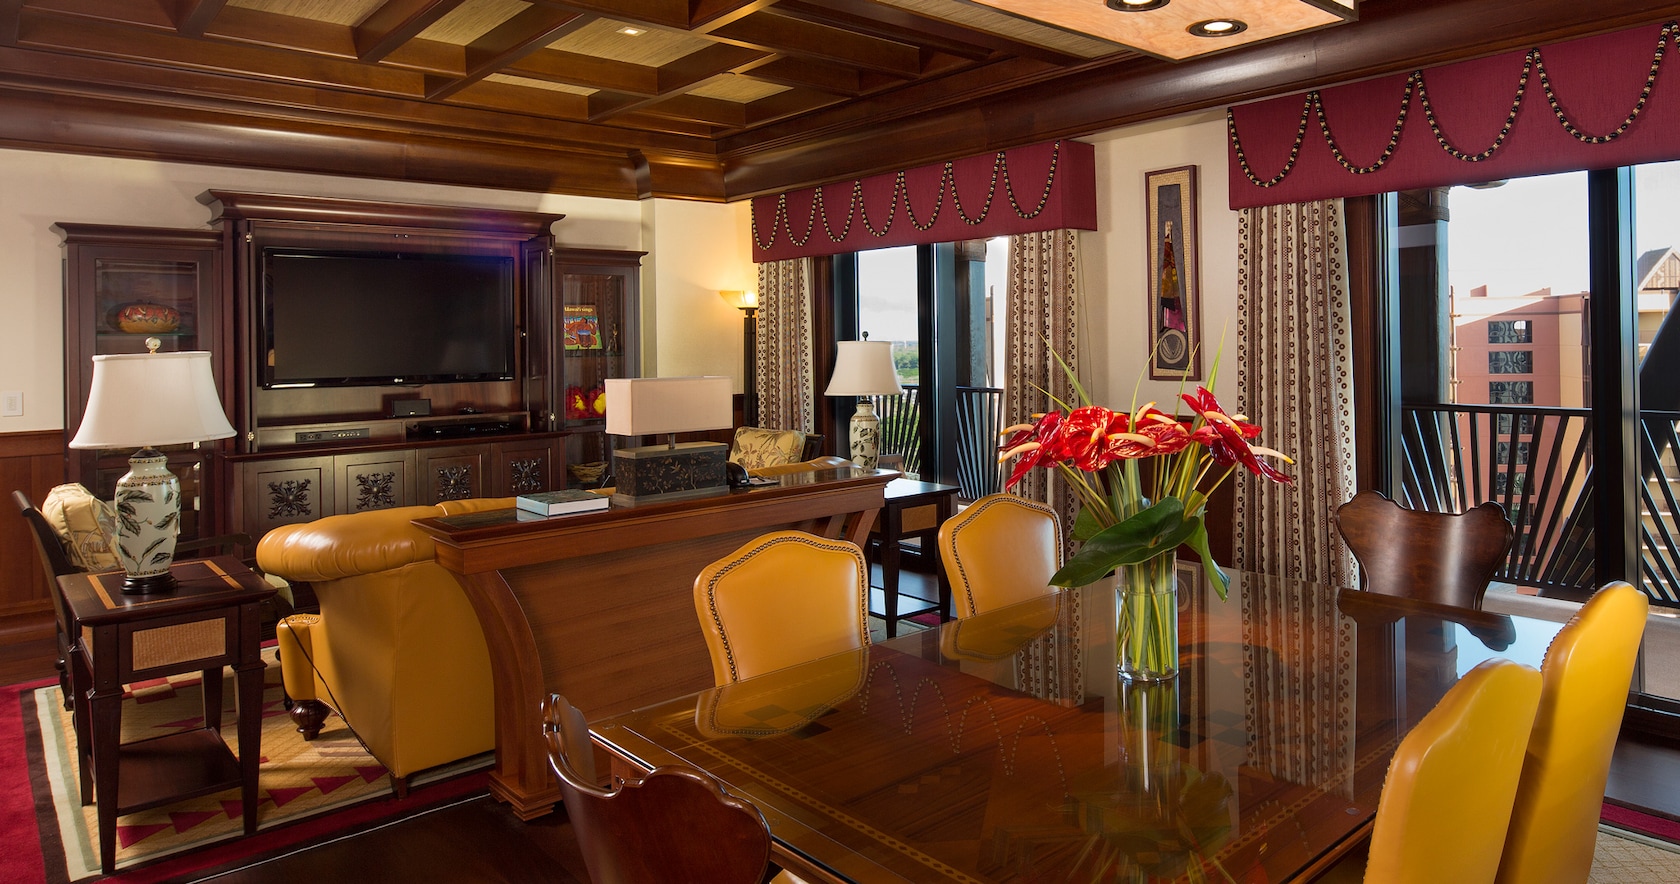 The living area of the 2-Bedroom Suite includes an entertainment center, seating area and dining table